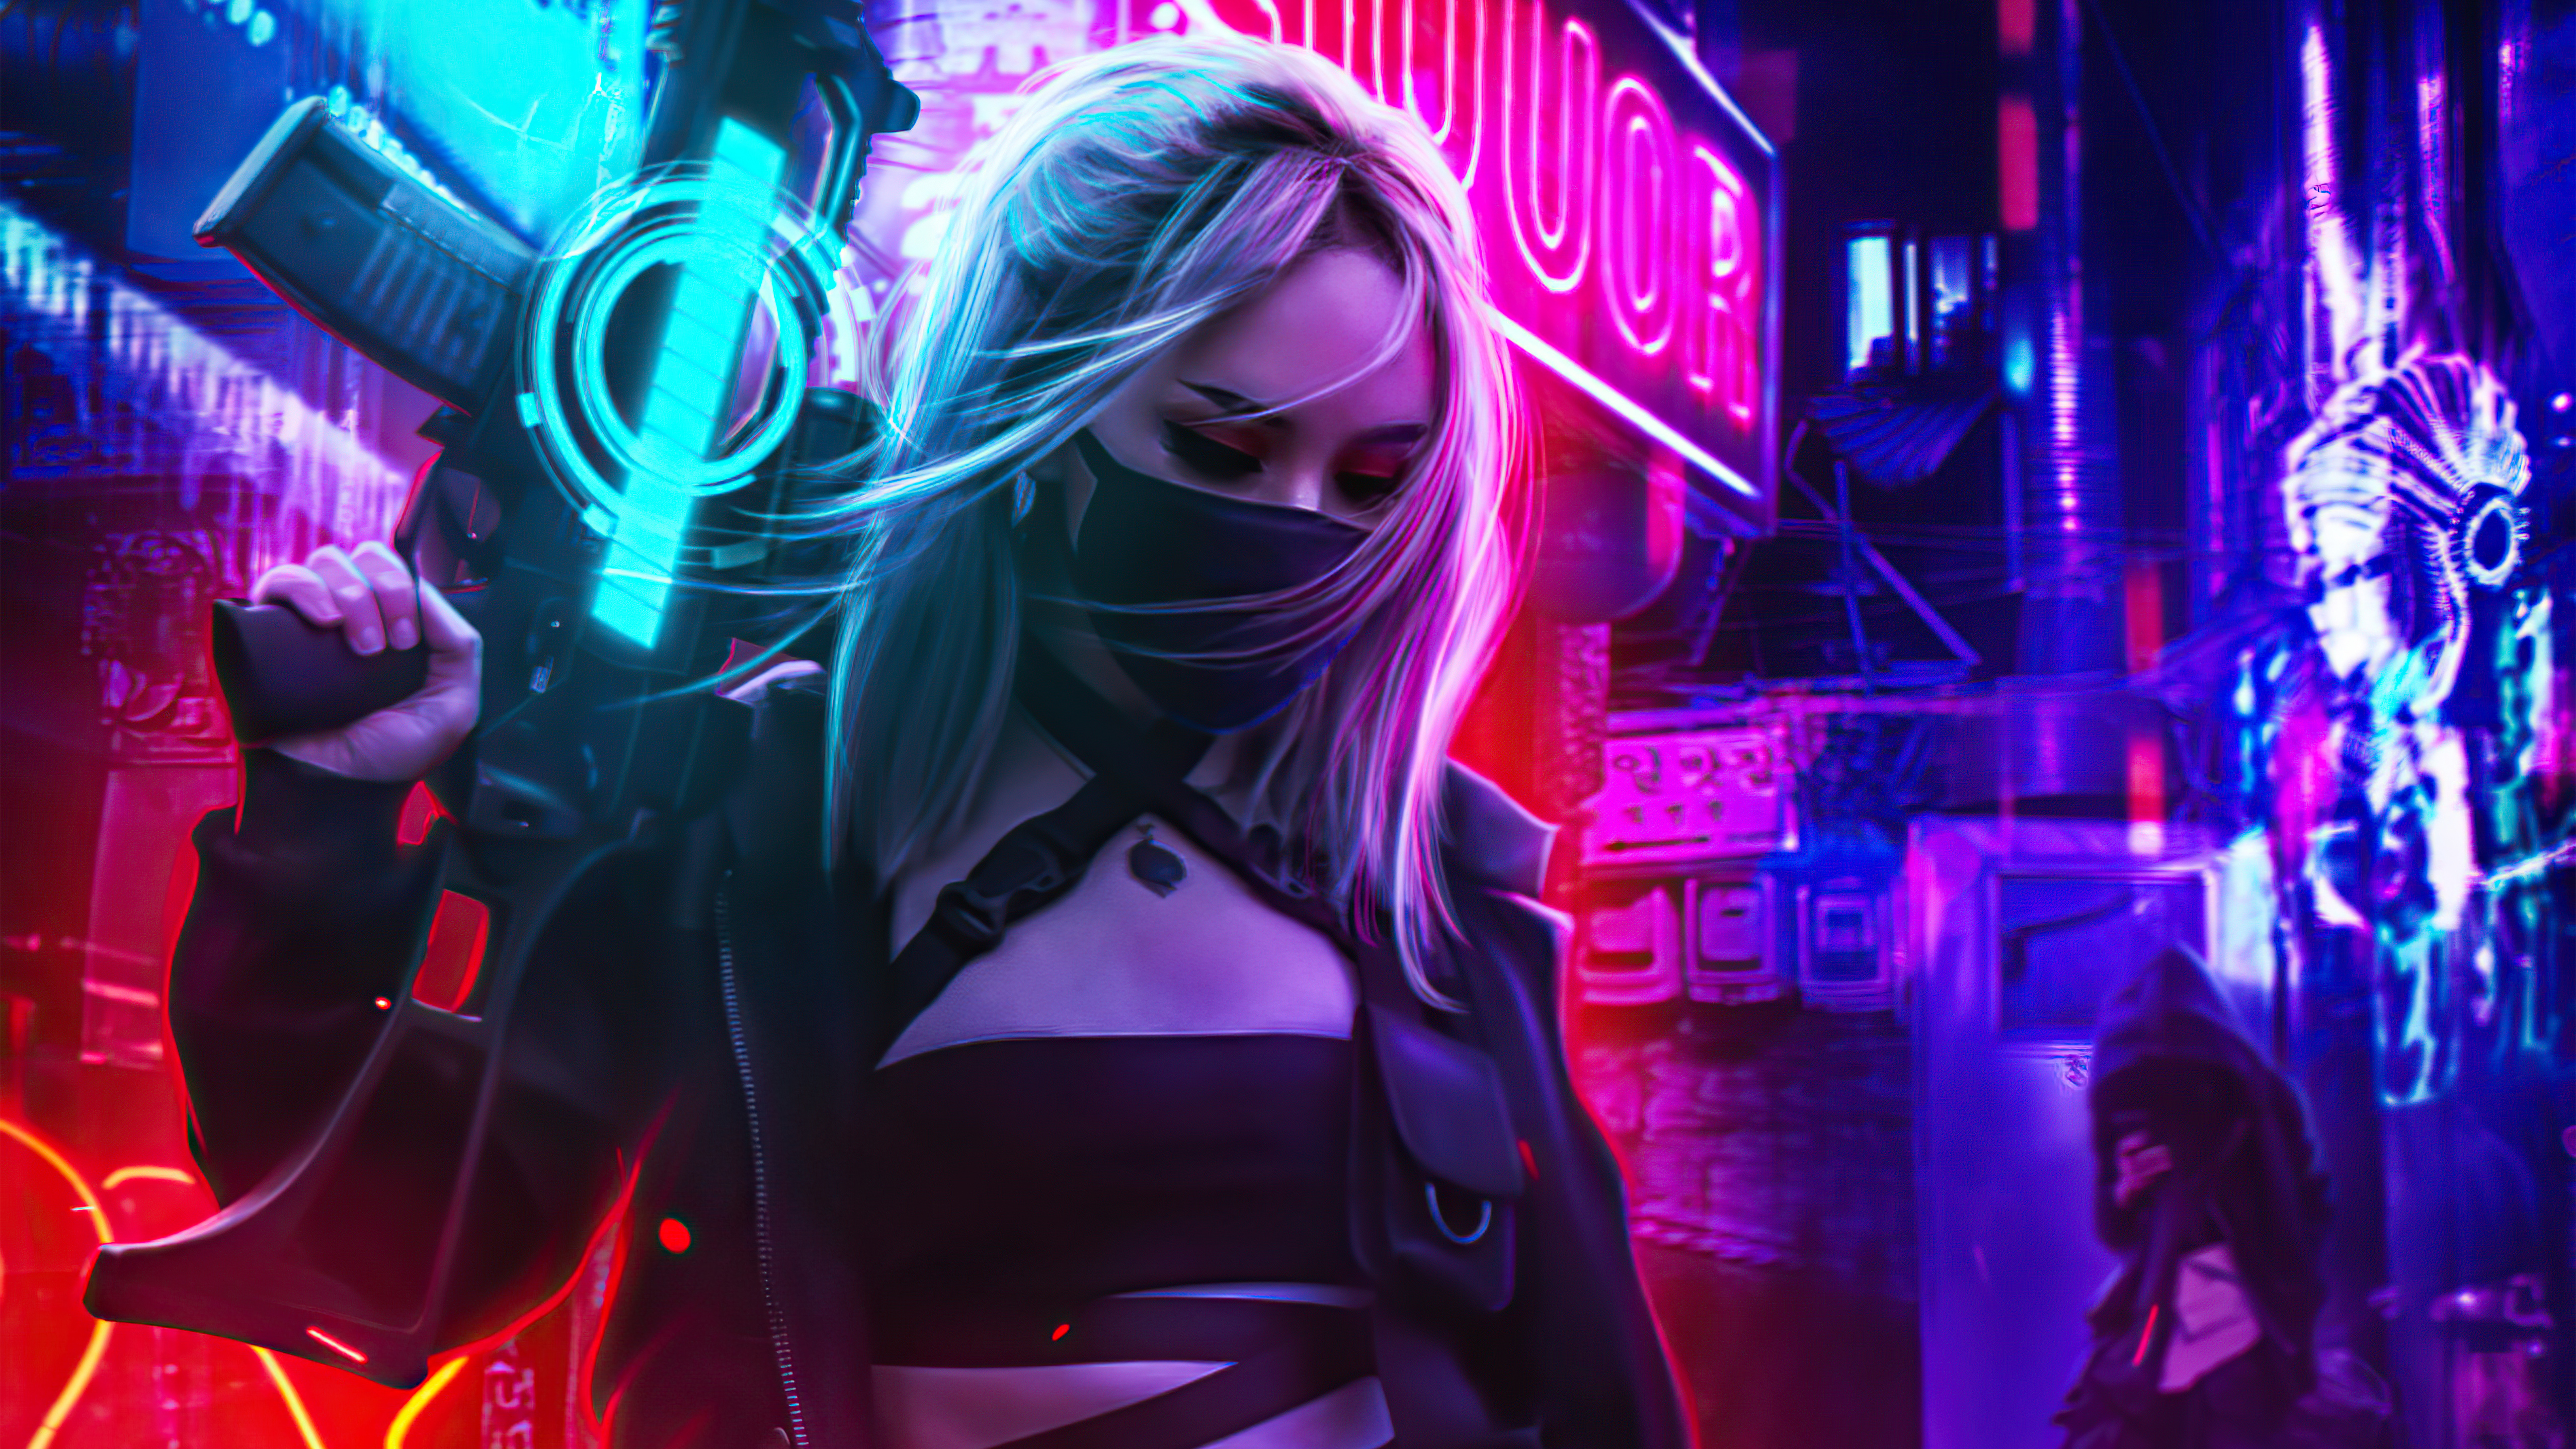 Cyberpunk Girl In Neon Mode 5k, HD Artist, 4k Wallpapers, Images,  Backgrounds, Photos and Pictures